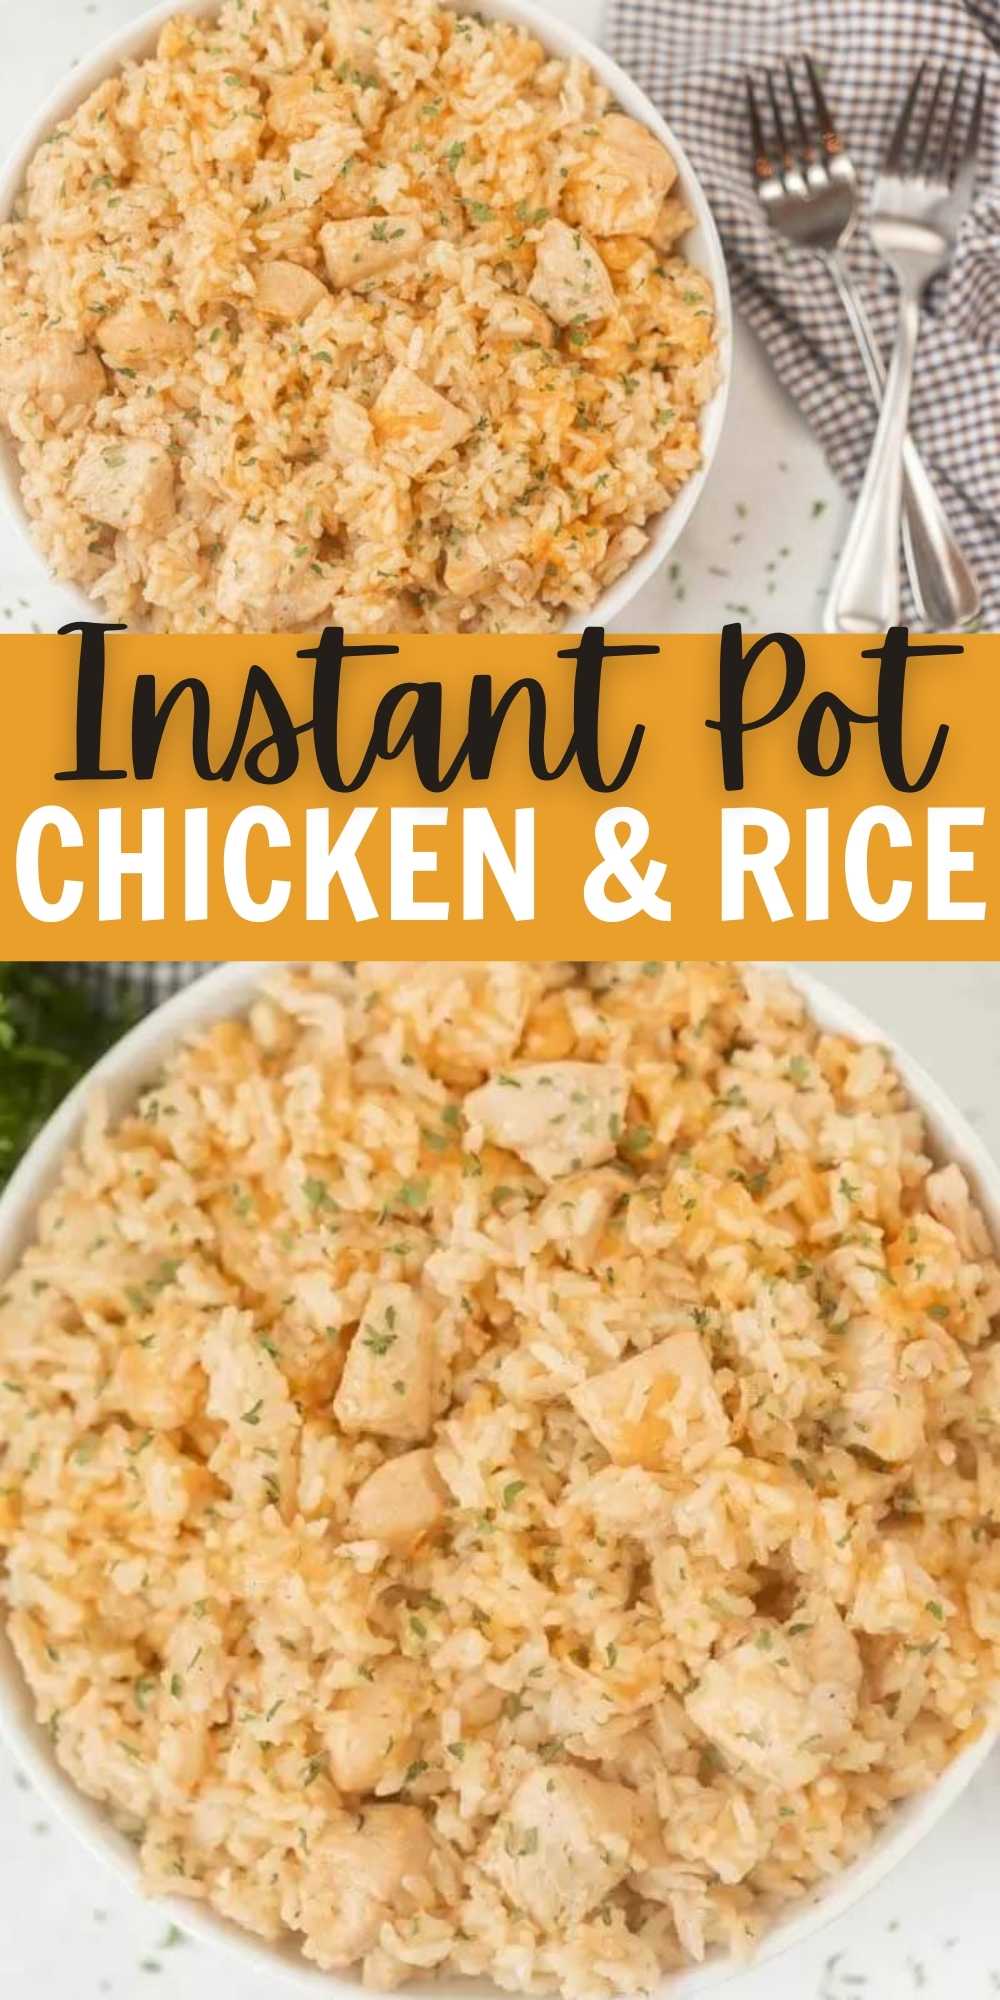 Get dinner on the table quickly with the instant chicken and rice recipe. Ready in just 30 minutes, the instant chicken and cheese and rice casserole is so simple and delicious too! The whole family will love this easy-to-make chicken and rice recipe! #eatingonadime #instantpotrecipes #chickenrecipes #chickenandrice